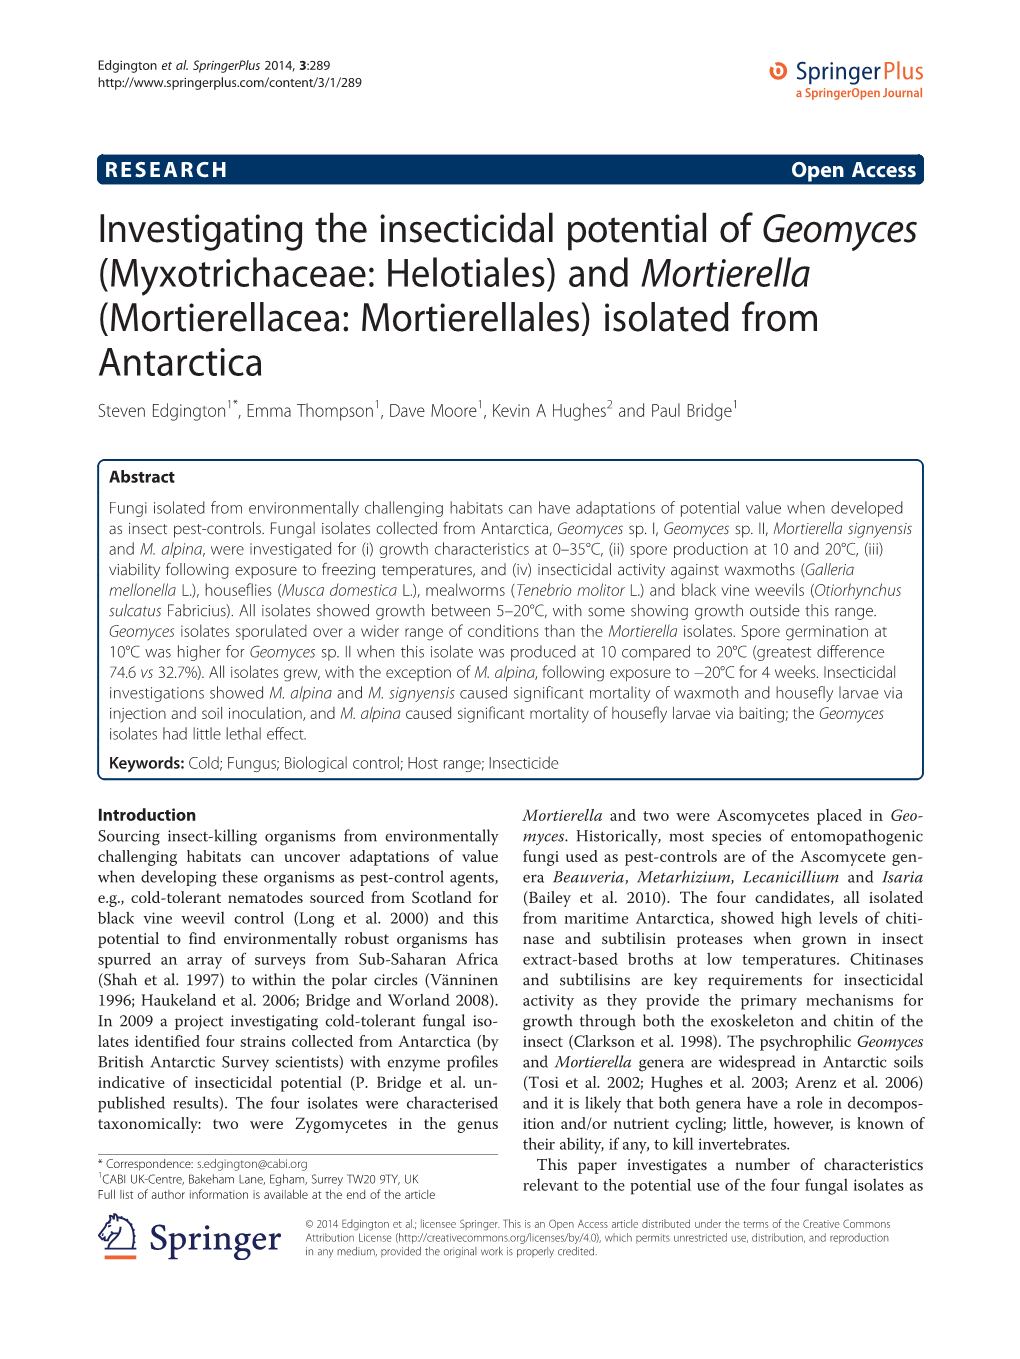 Investigating the Insecticidal Potential of Geomyces (Myxotrichaceae: Helotiales) and Mortierella (Mortierellacea: Mortierellale